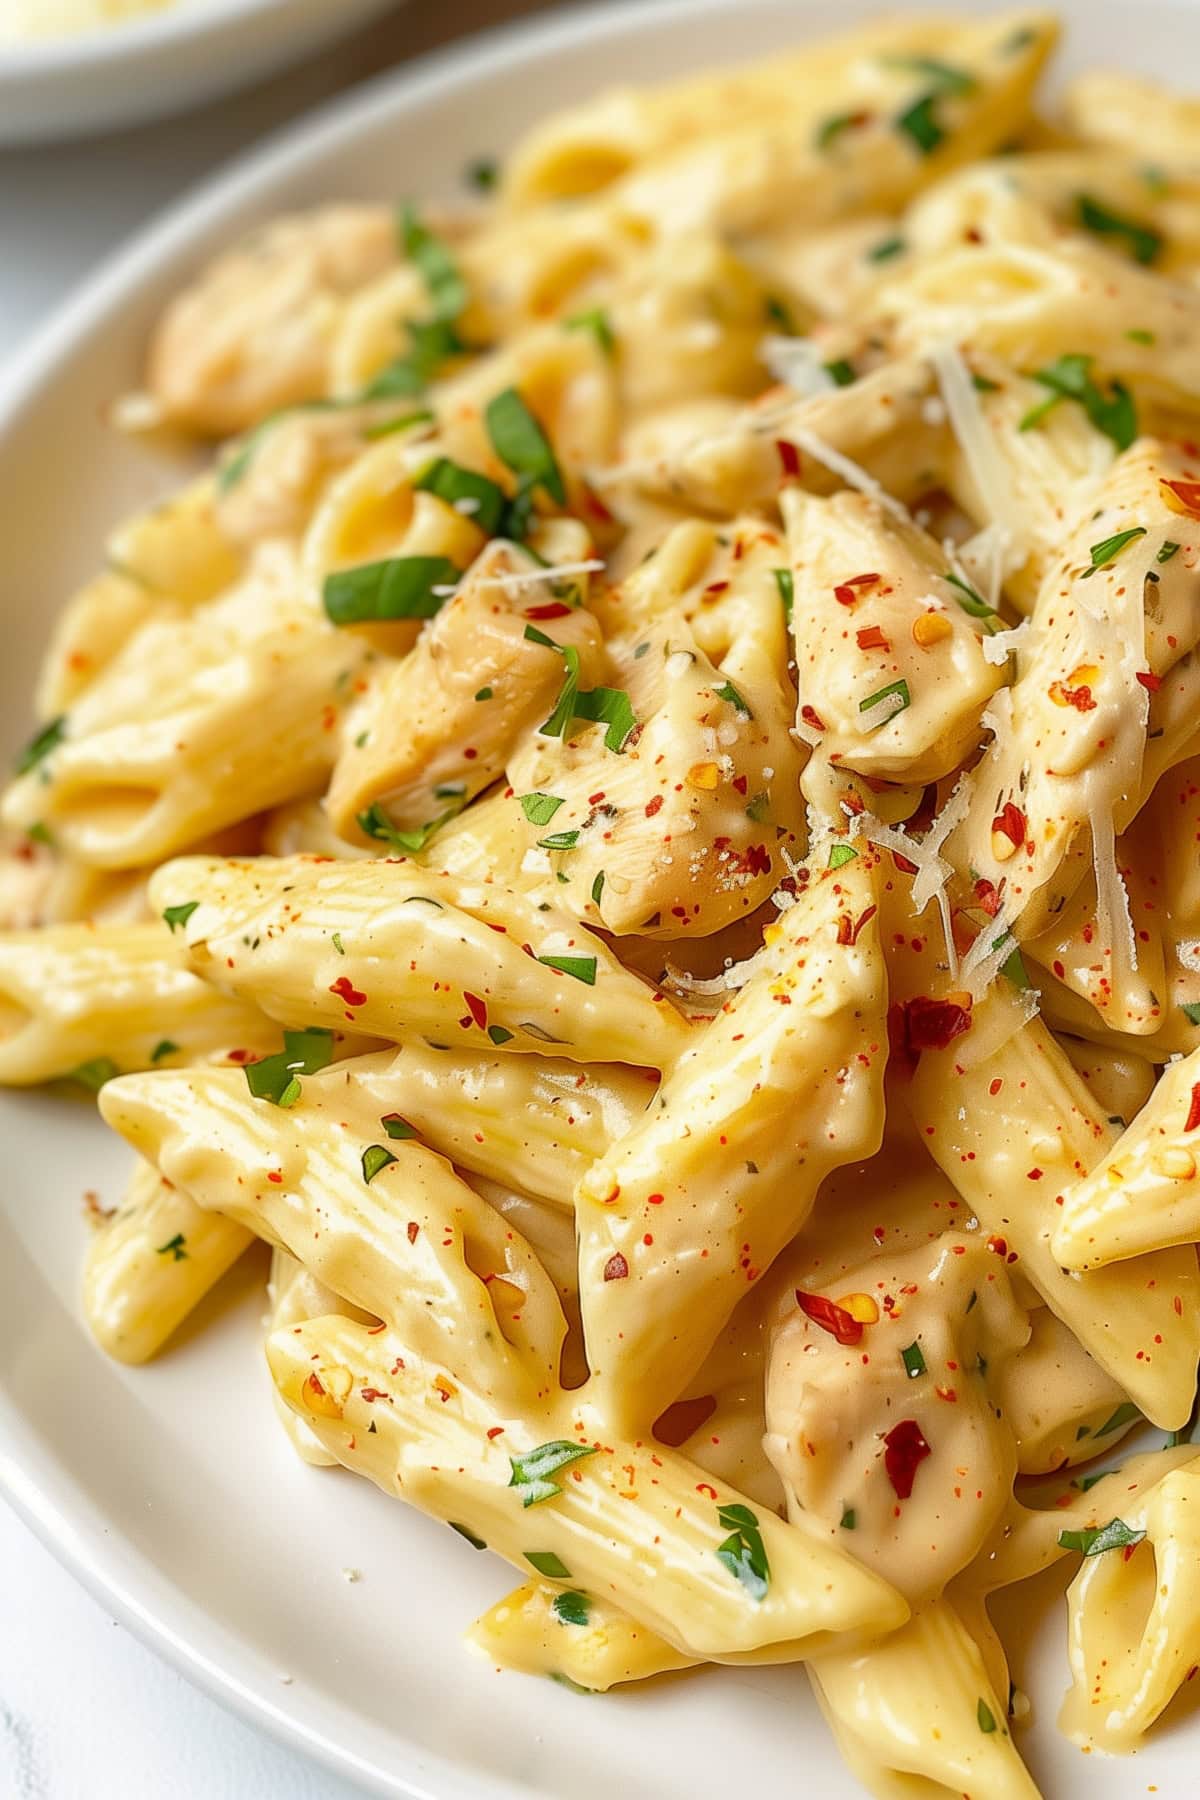 Garlic parmesan chicken pasta with red pepper flakes and parsley.